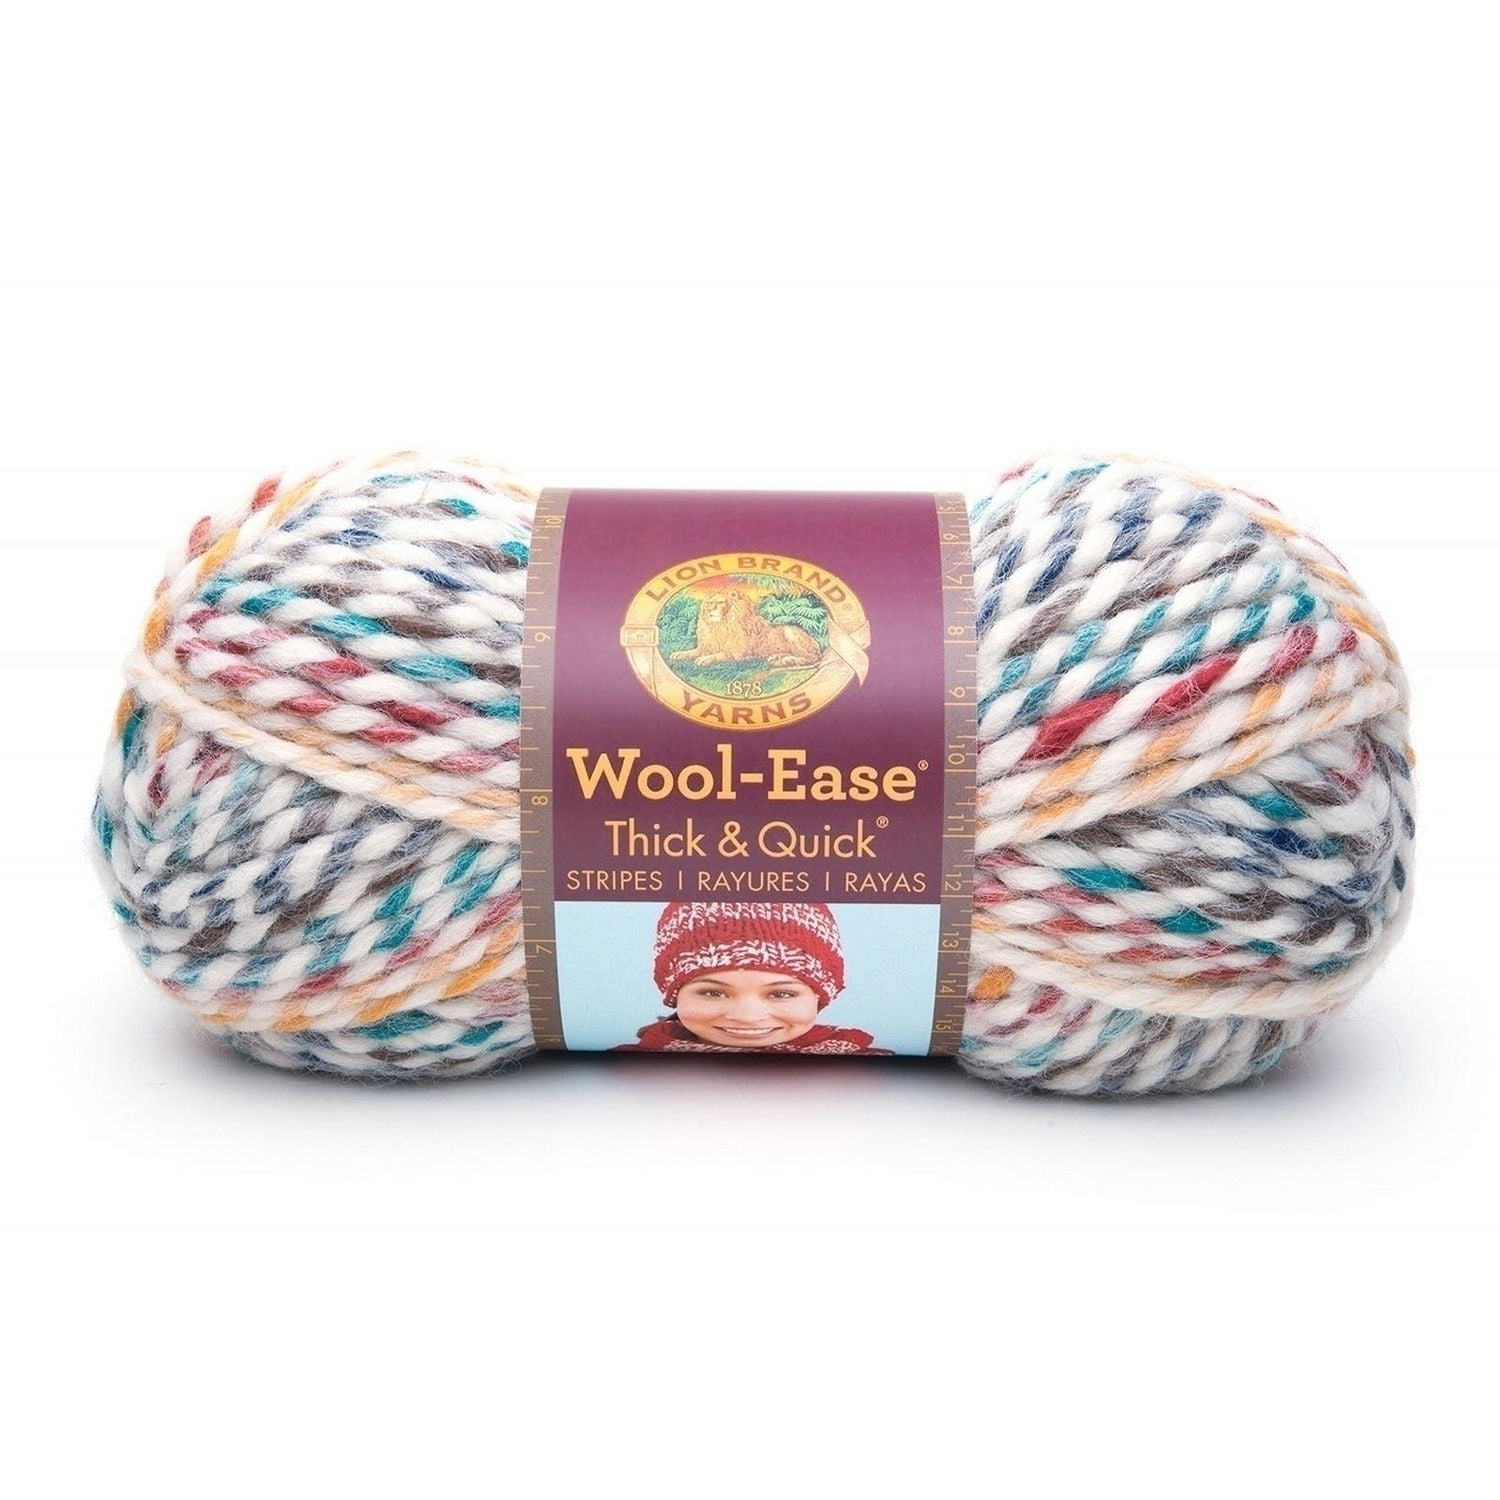 Lion Brand Yarn Wool Ease Thick & Quick Hudson Bay 640-610 Classic Bulky  Yarn, warmth and softness of wool with easy care 